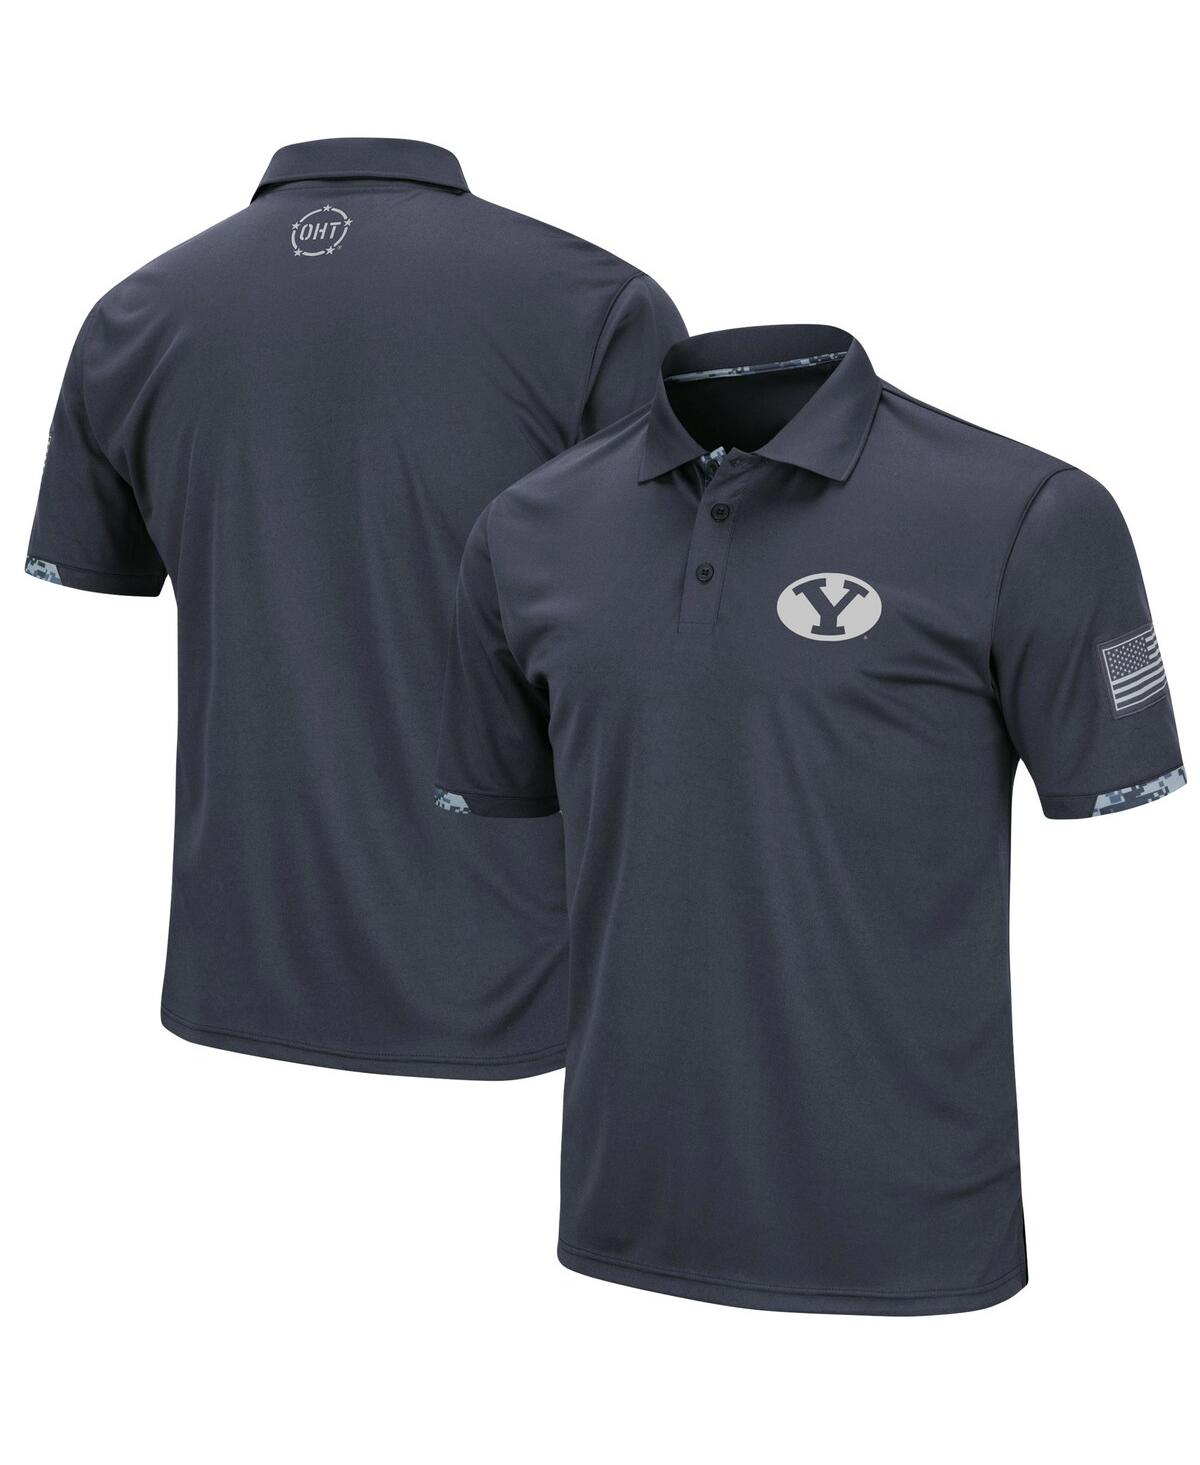 Men's Colosseum Charcoal Byu Cougars Oht Military-Inspired Appreciation Digital Camo Polo Shirt - Charcoal